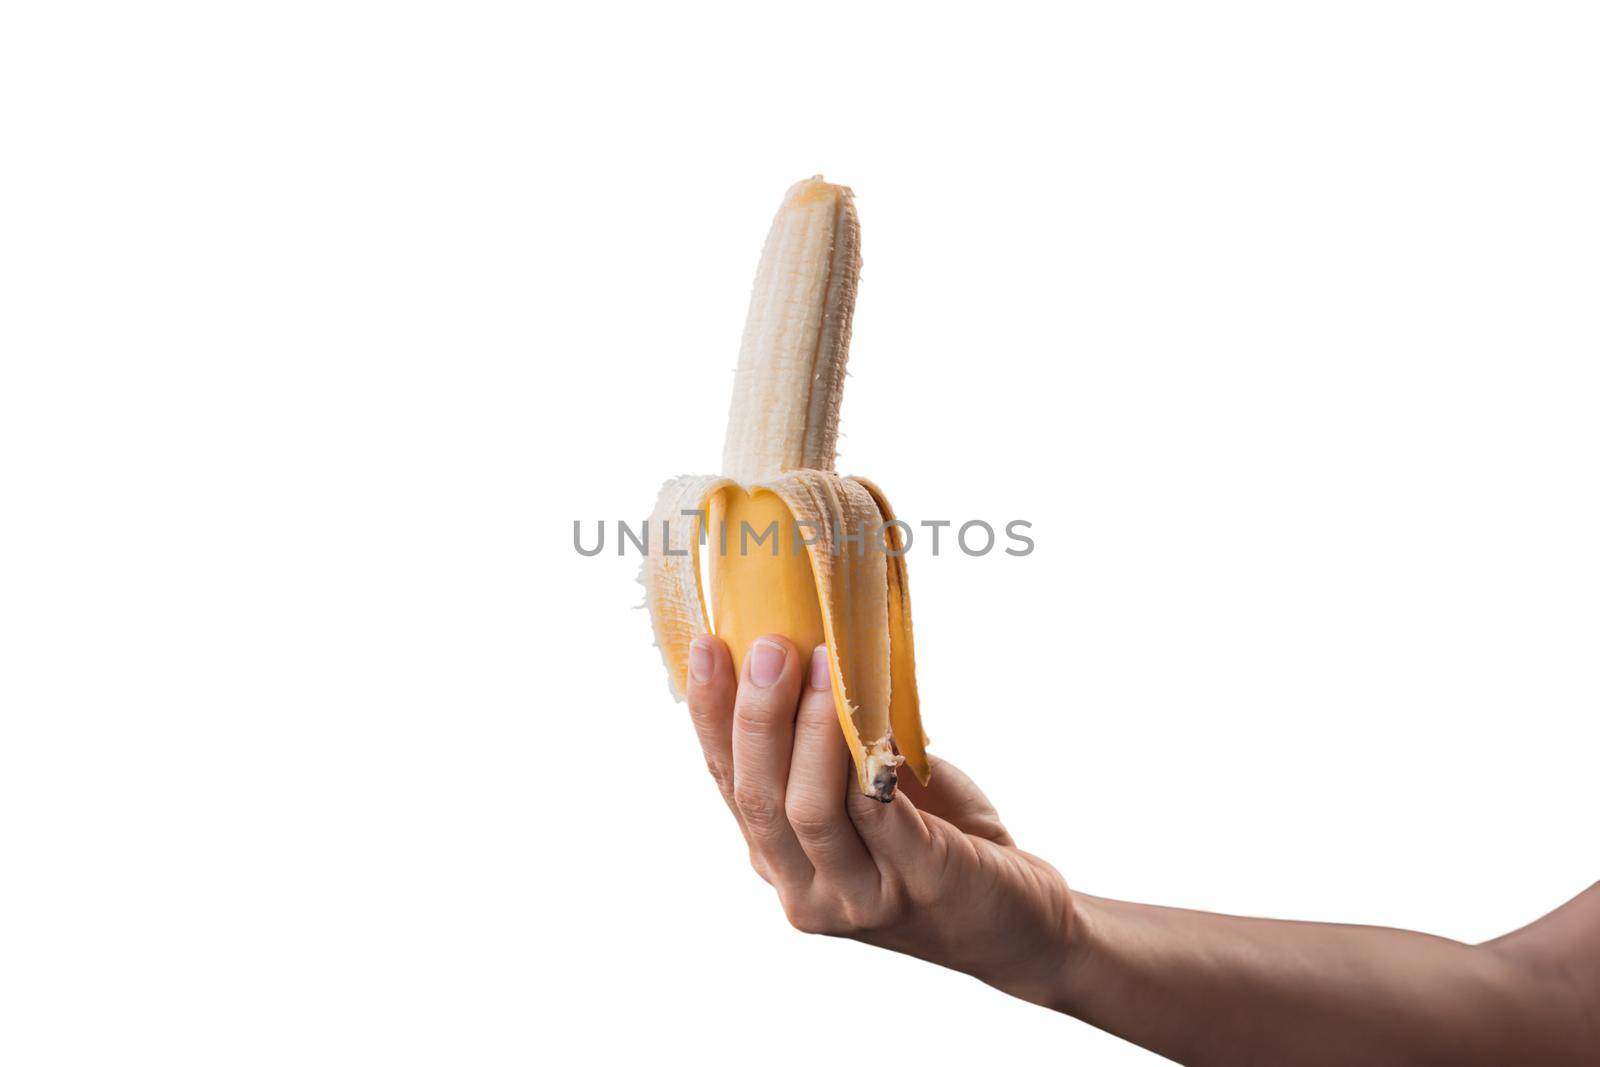 Closeup a woman's hand holding a ripe banana isolated on white background